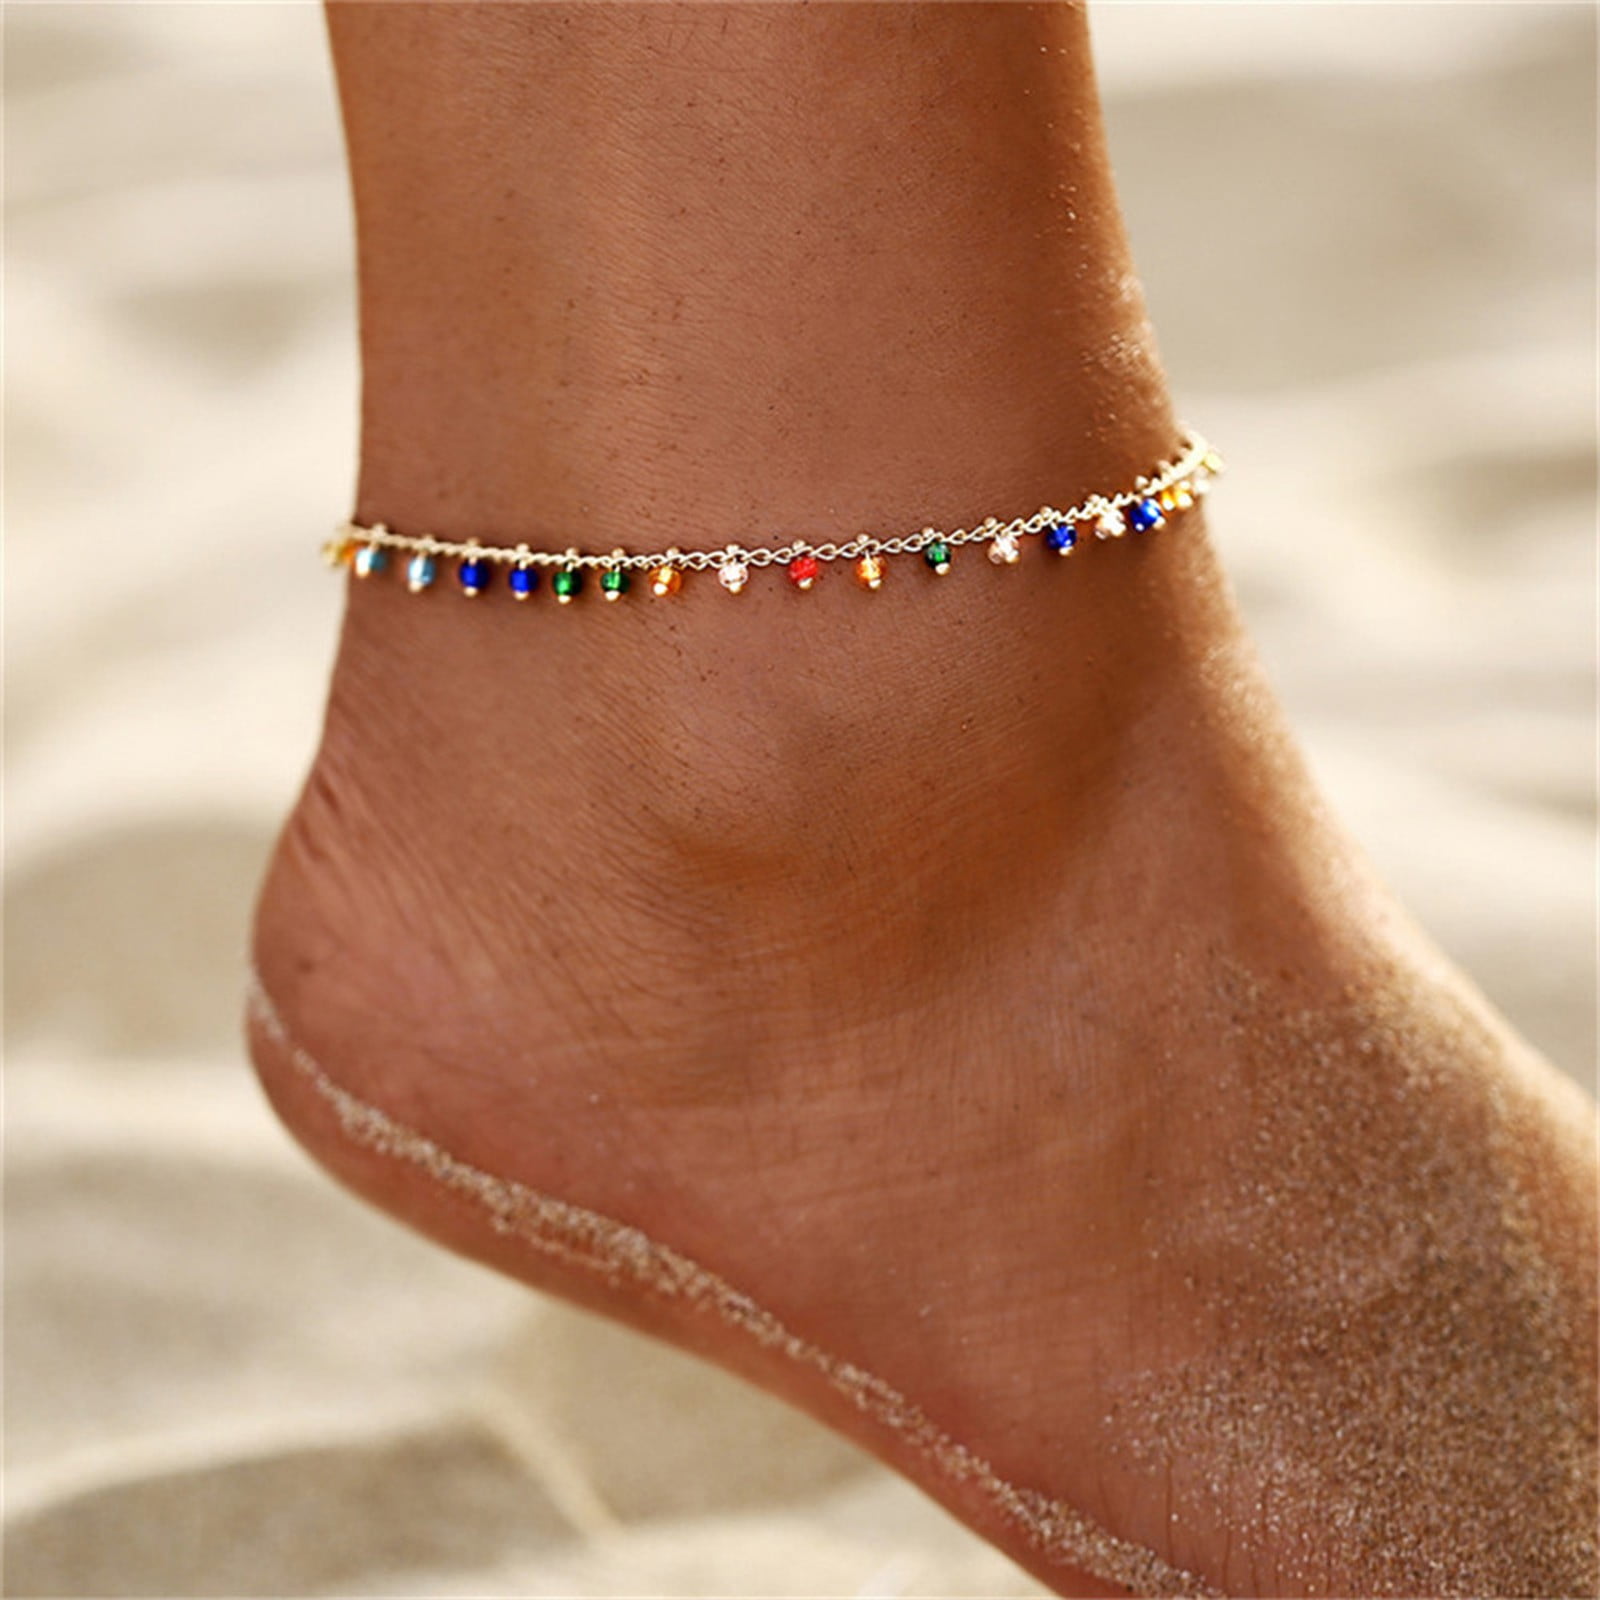 Women Lady Gothic Ankle Foot Chain Black Woven Rhinestone Pendant Anklet Jewelry 